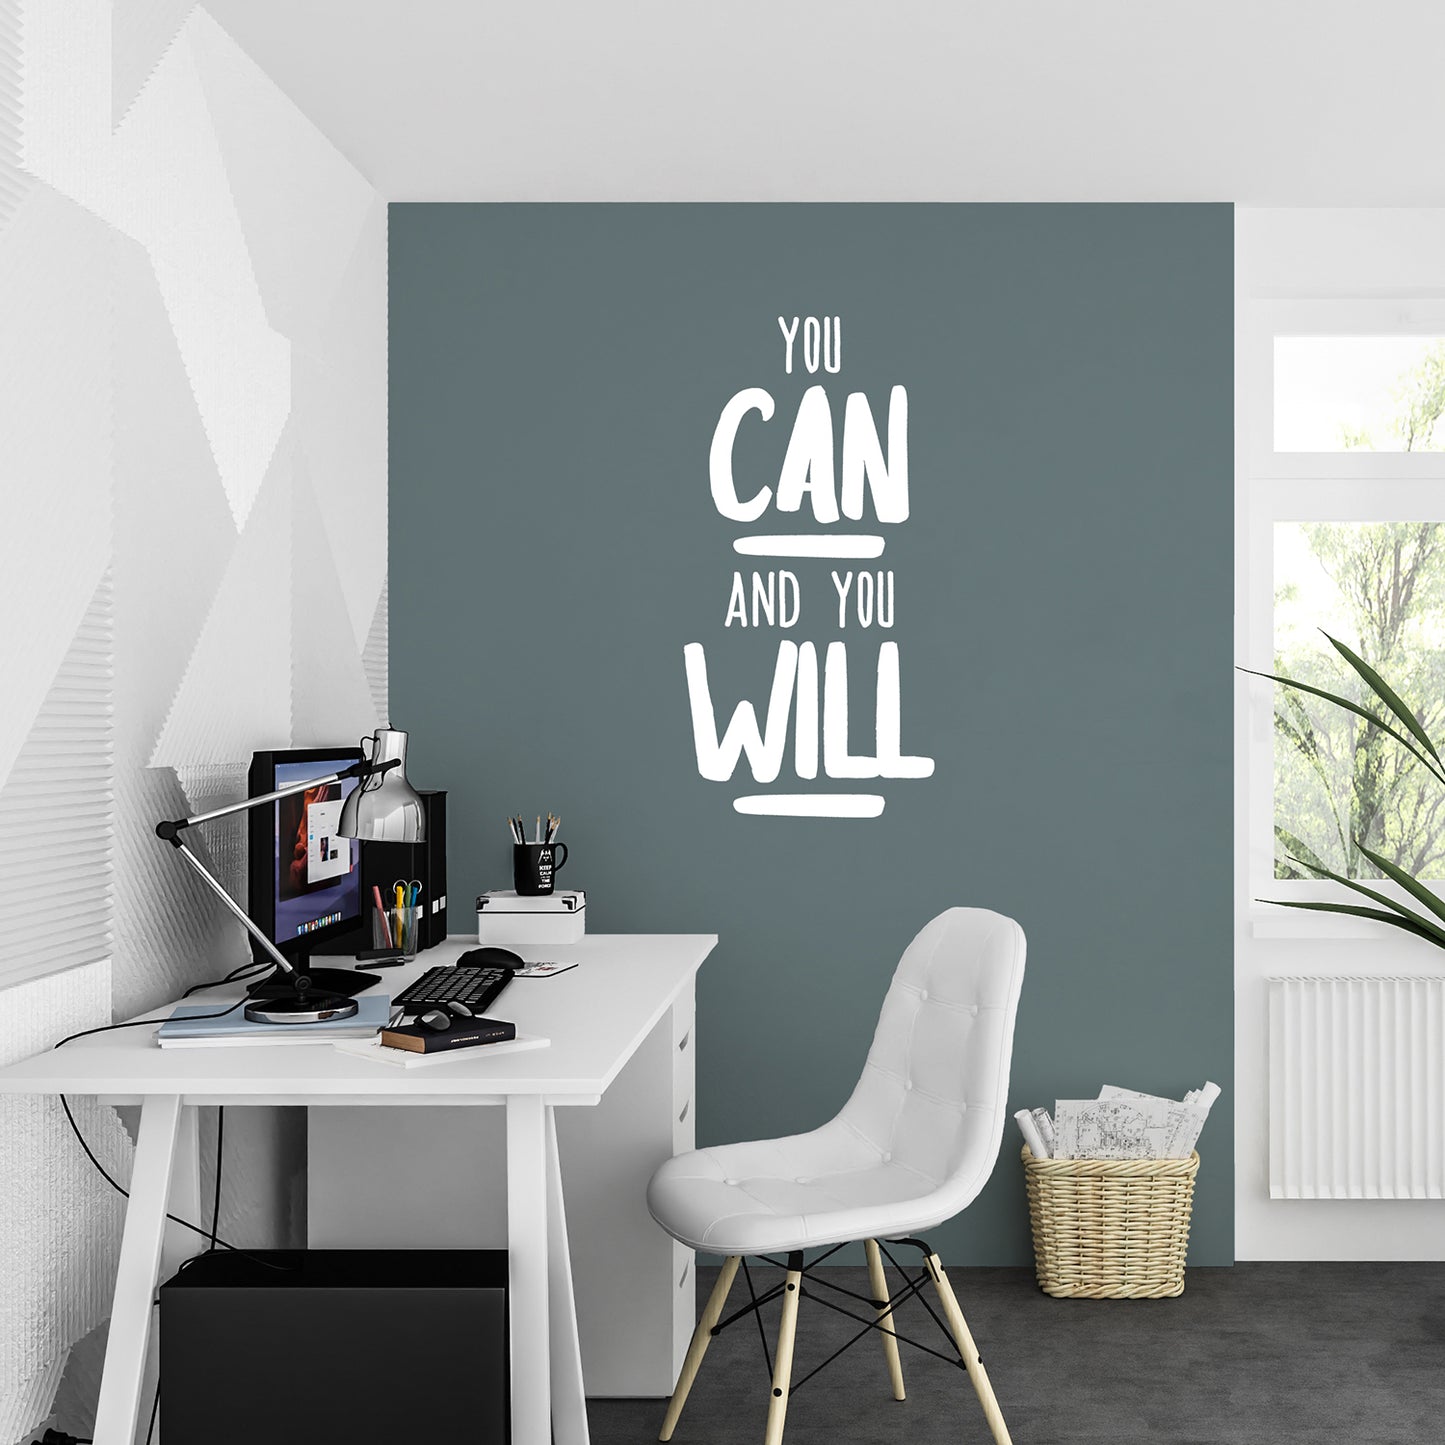 You can and you will | Wall quote